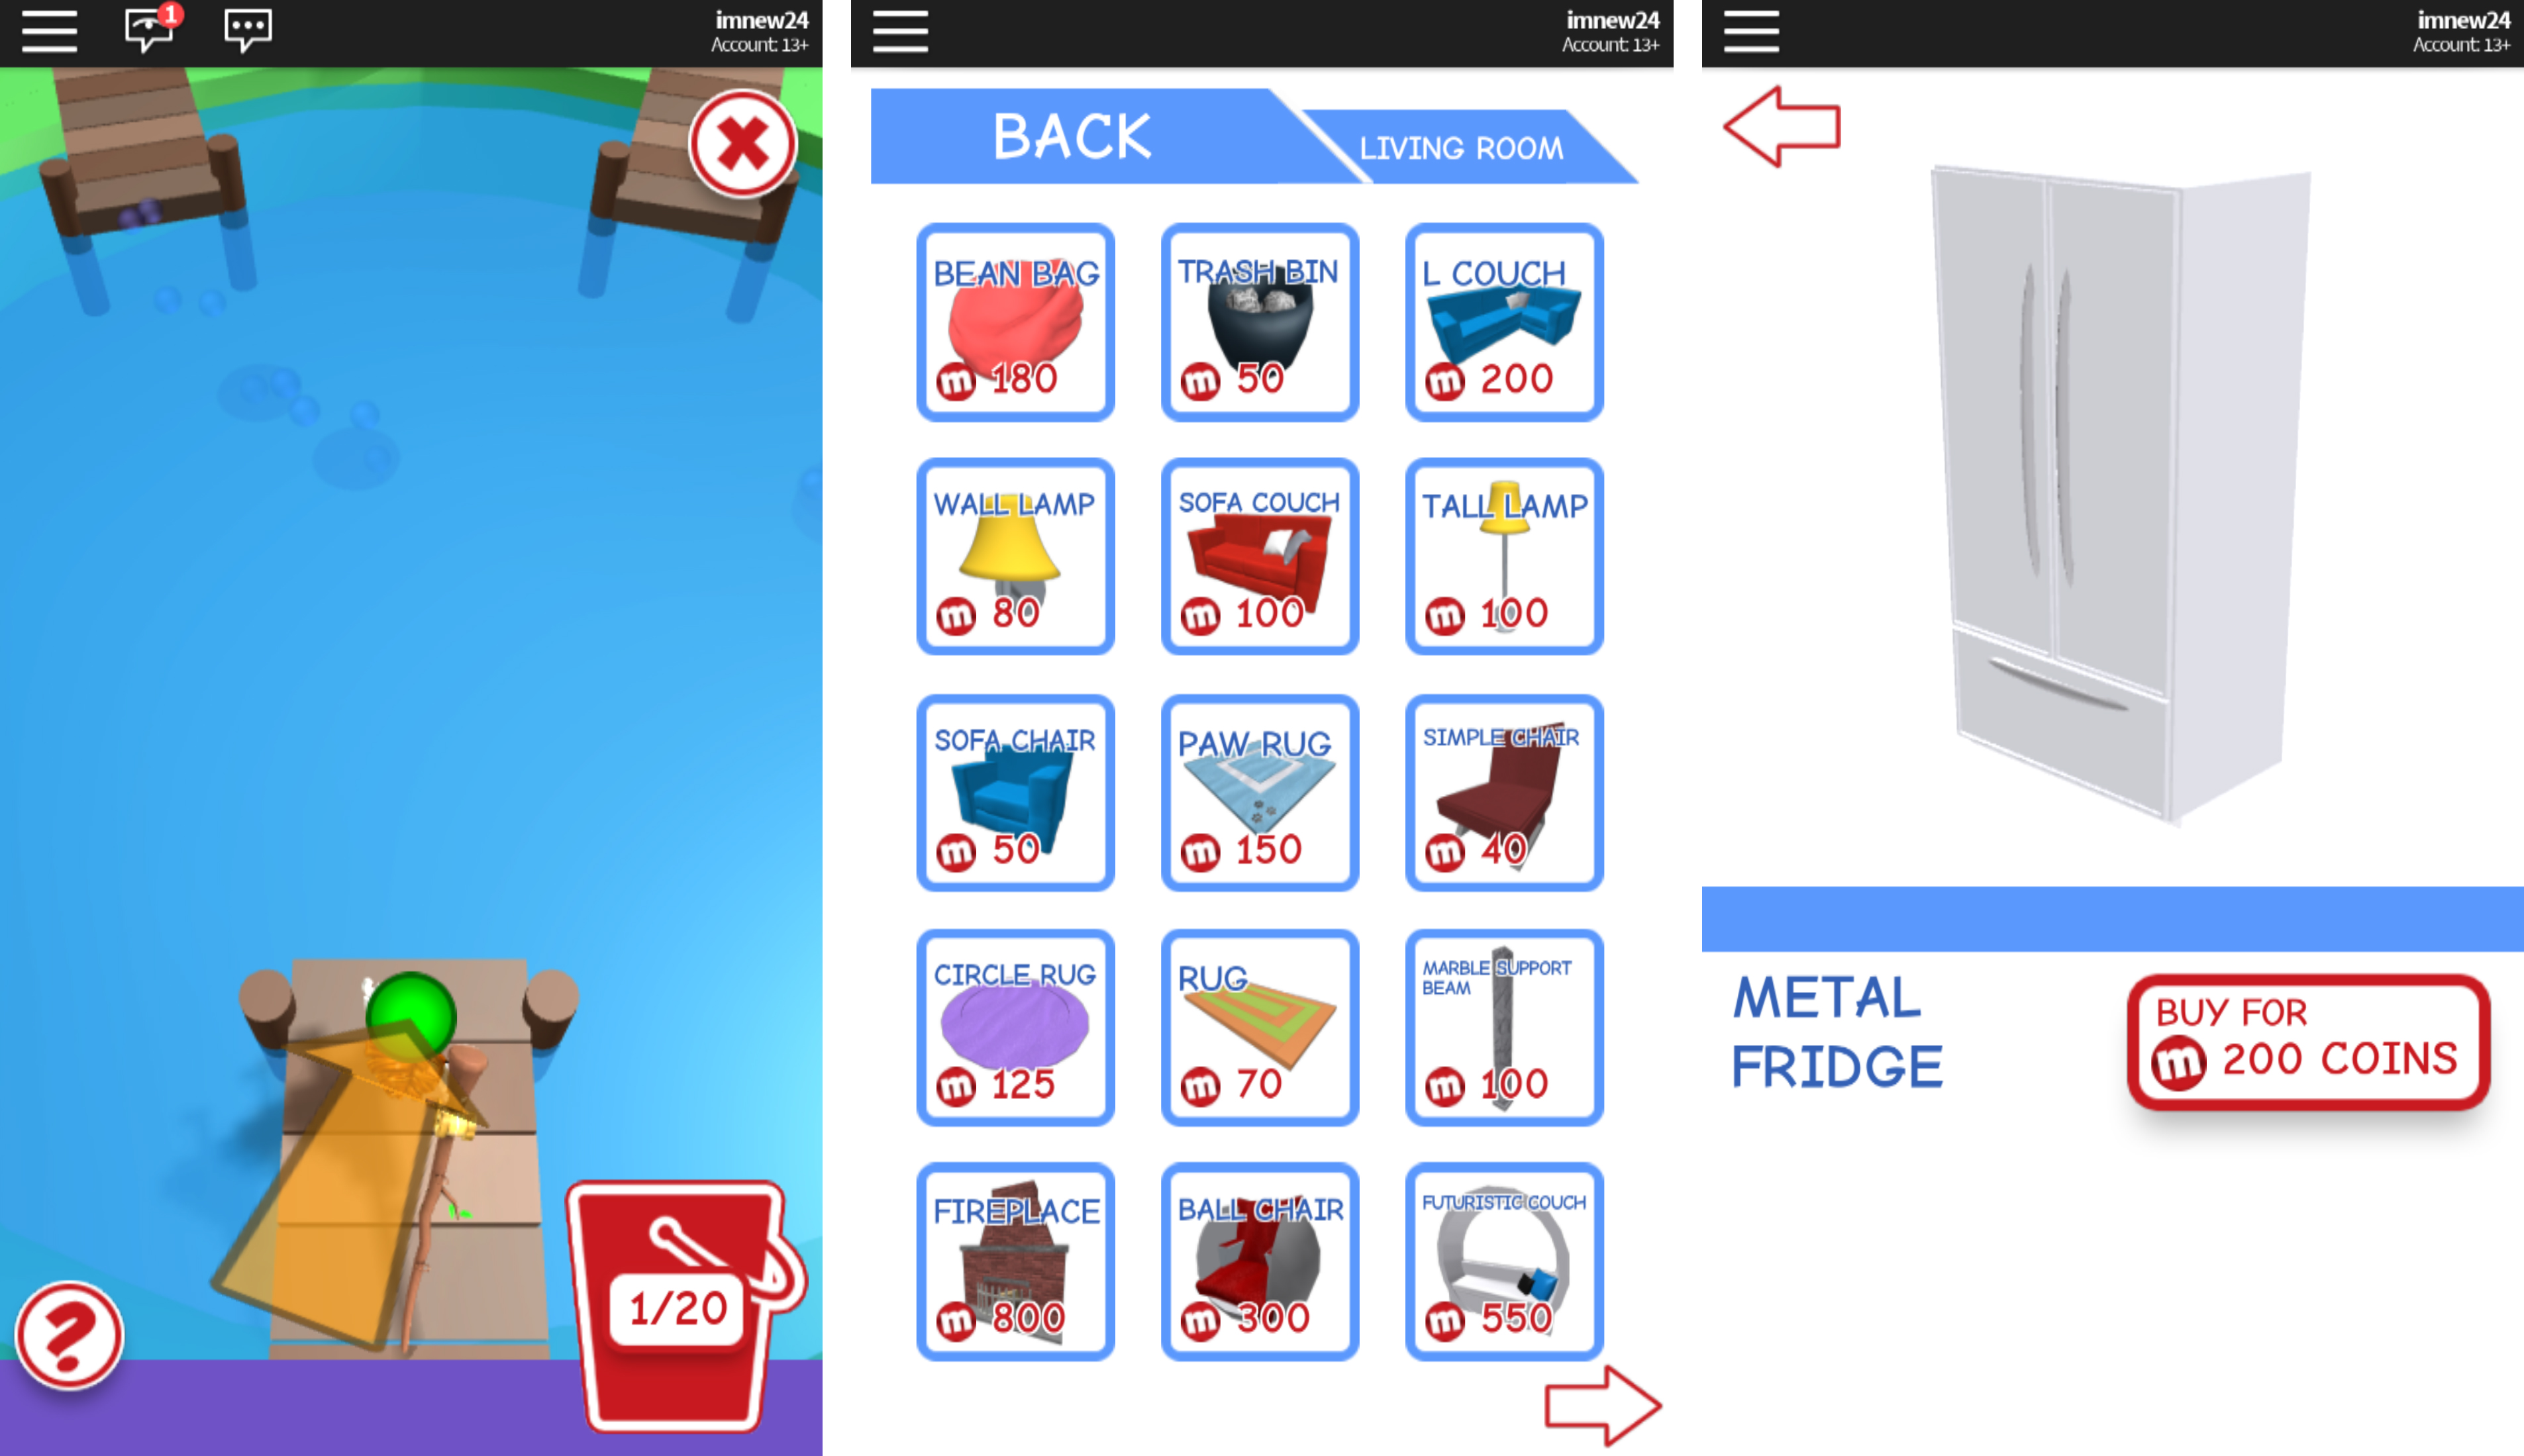 All Modes - Roblox